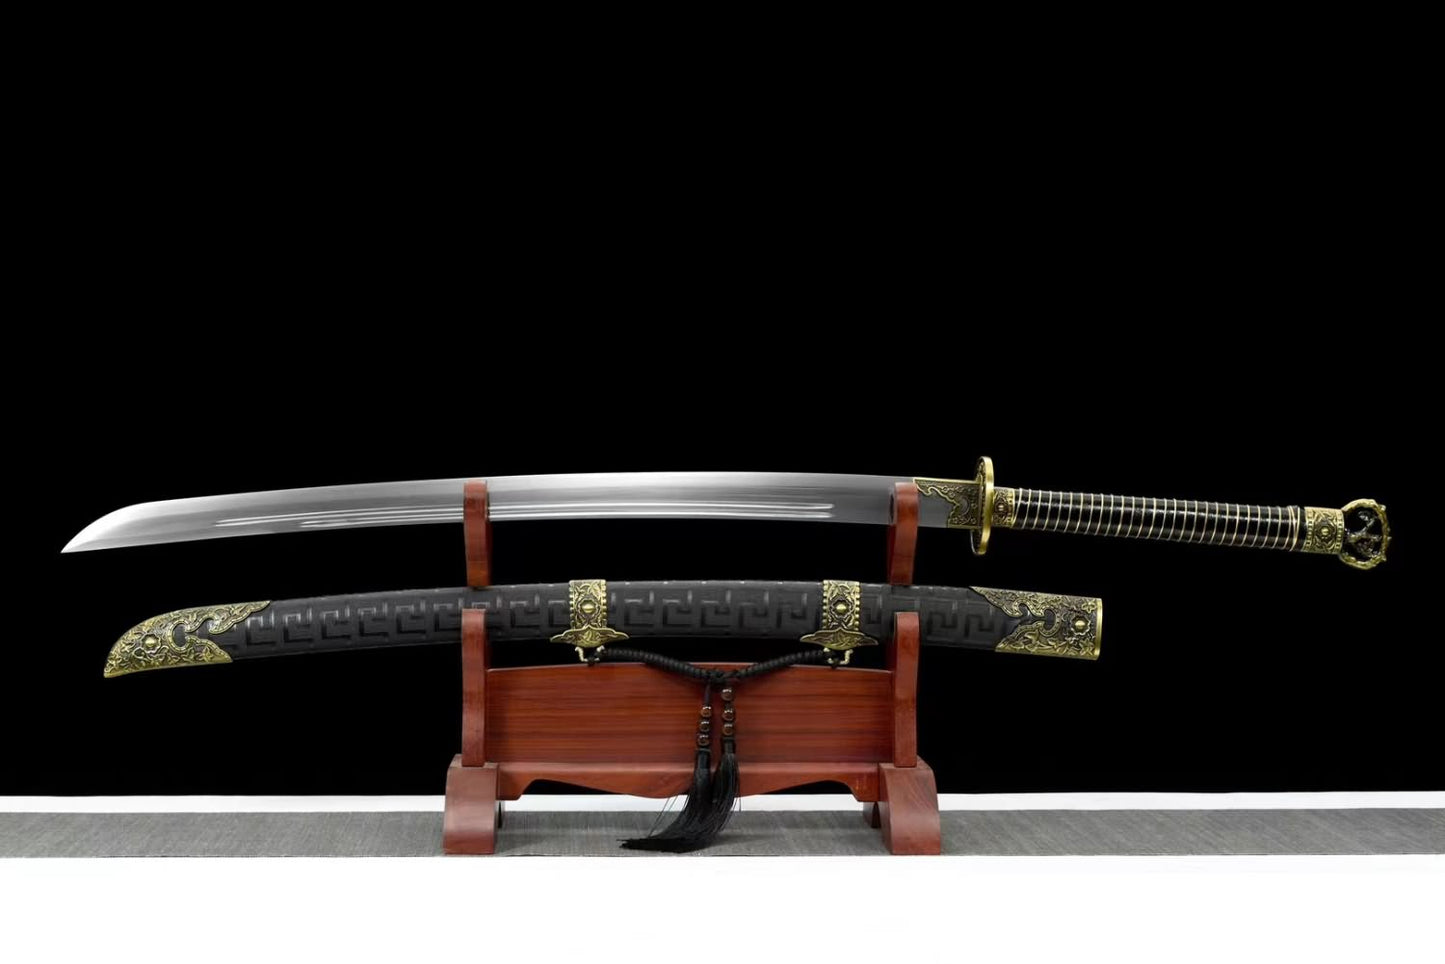 Yan ling dao with Forged High Carbon Steel Blade-PU Wood Scabbard and Alloy Fittings